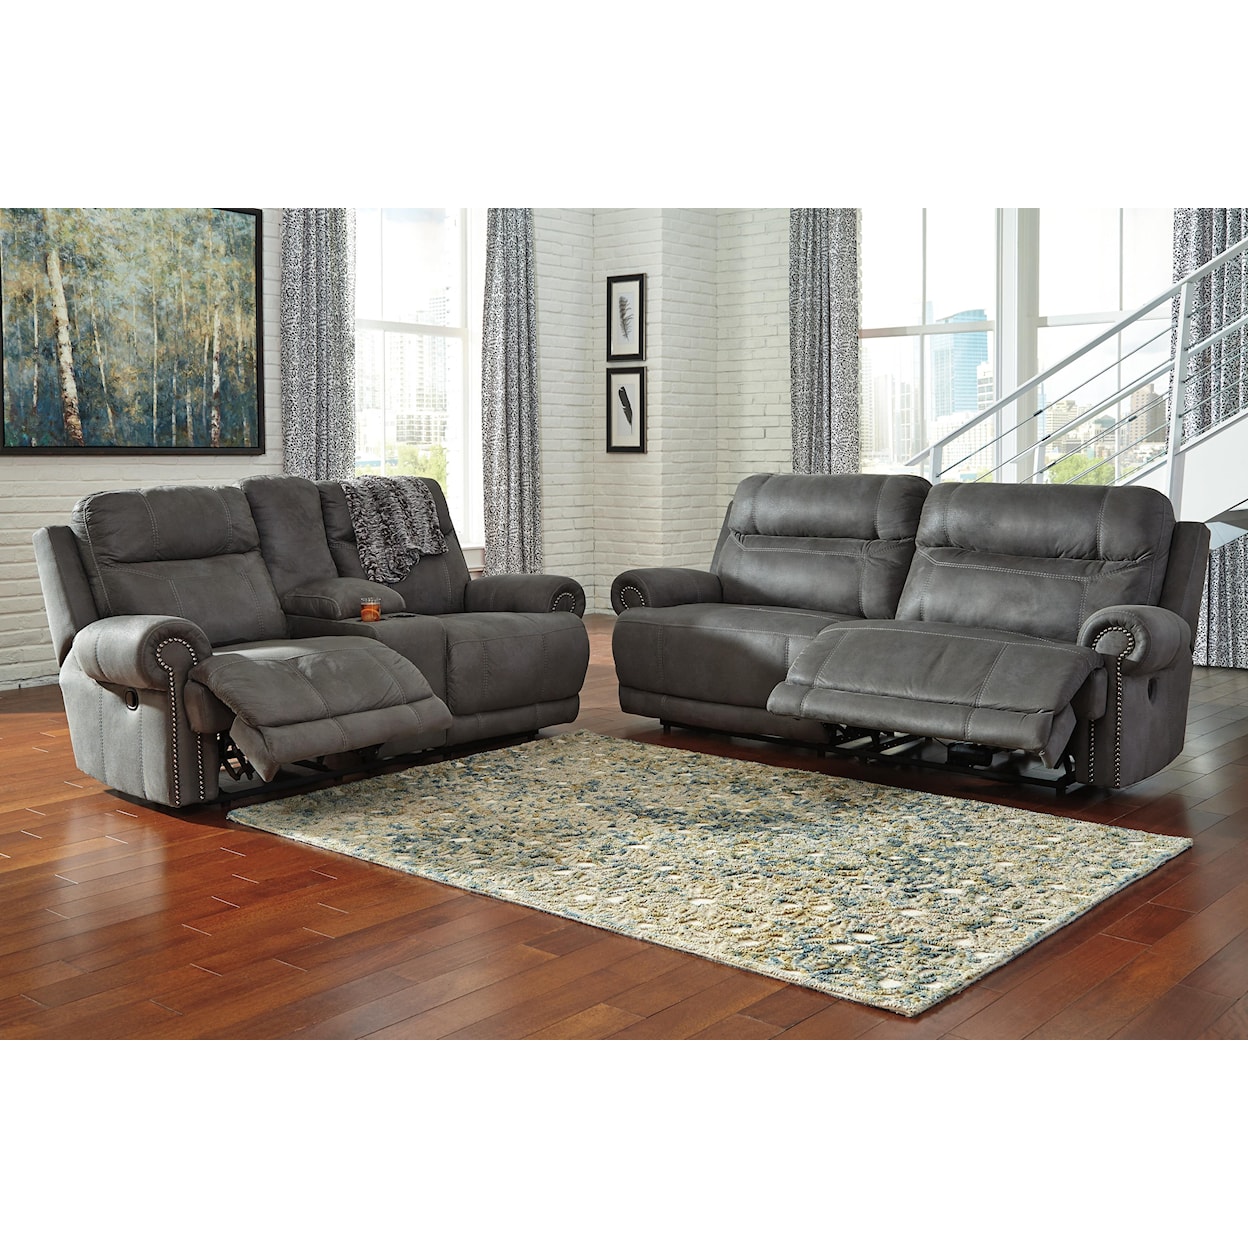 Ashley Signature Design Austere Reclining Living Room Group